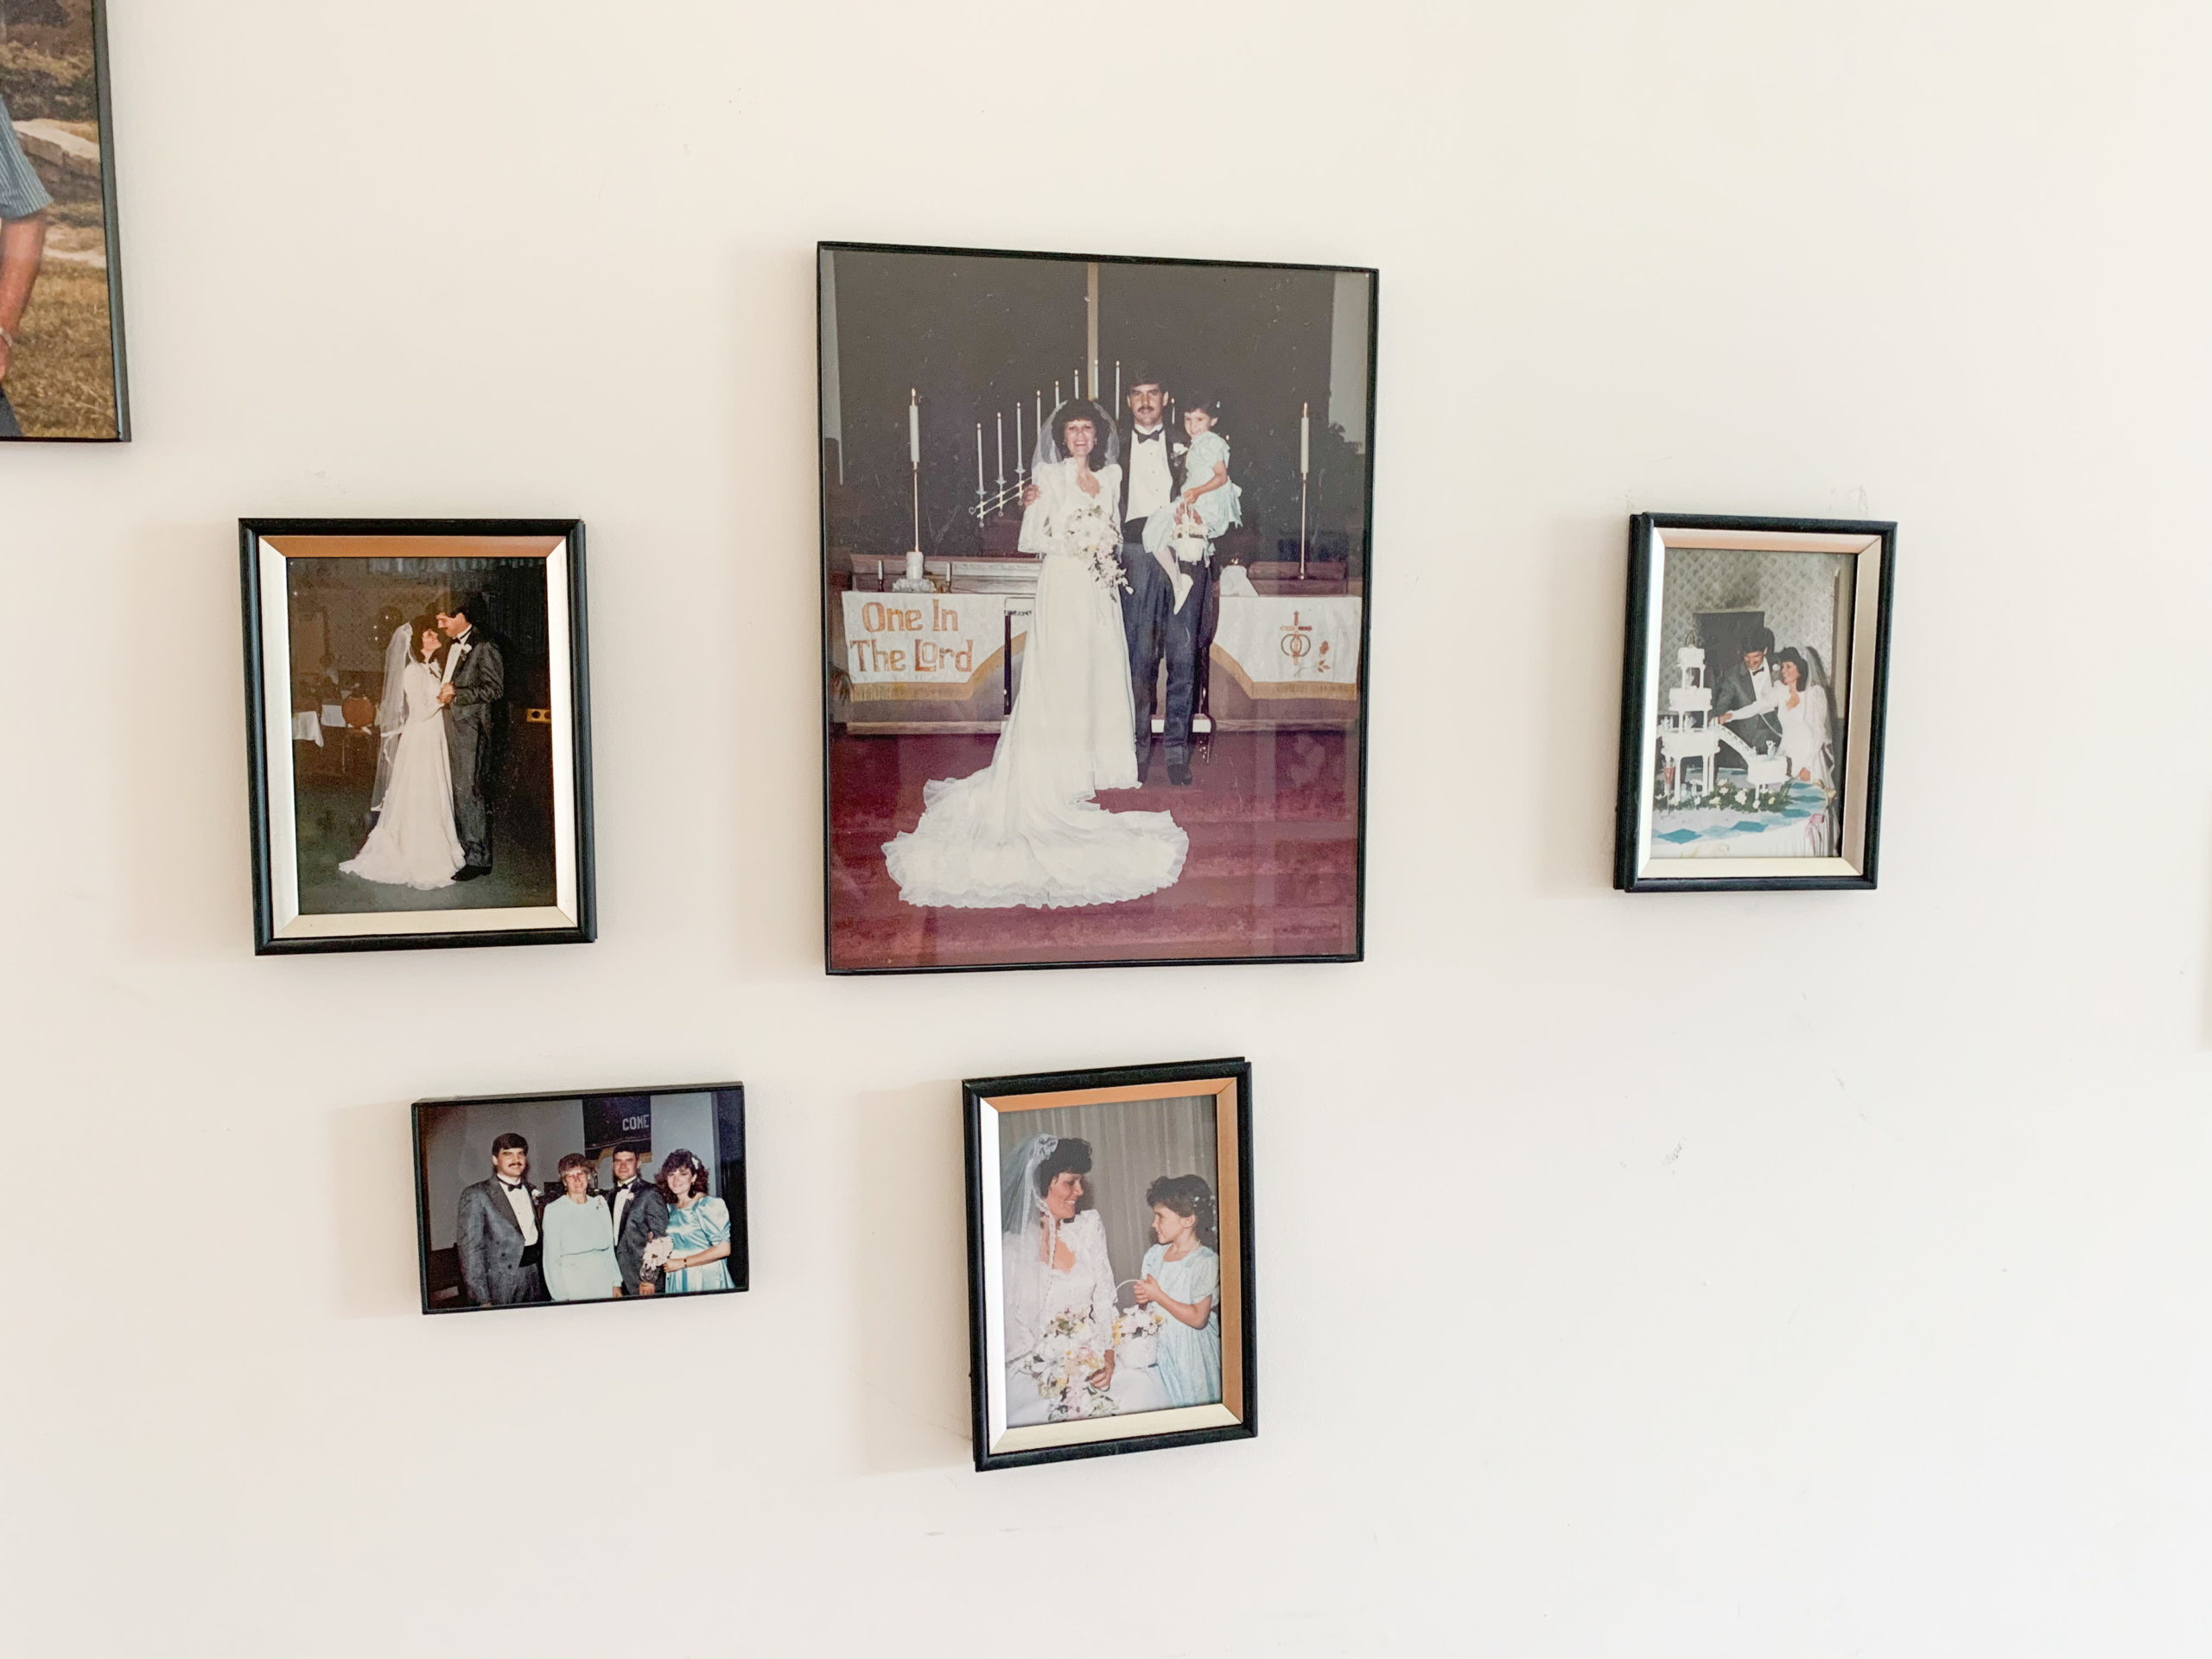 wedding photos printed on the walls of a house